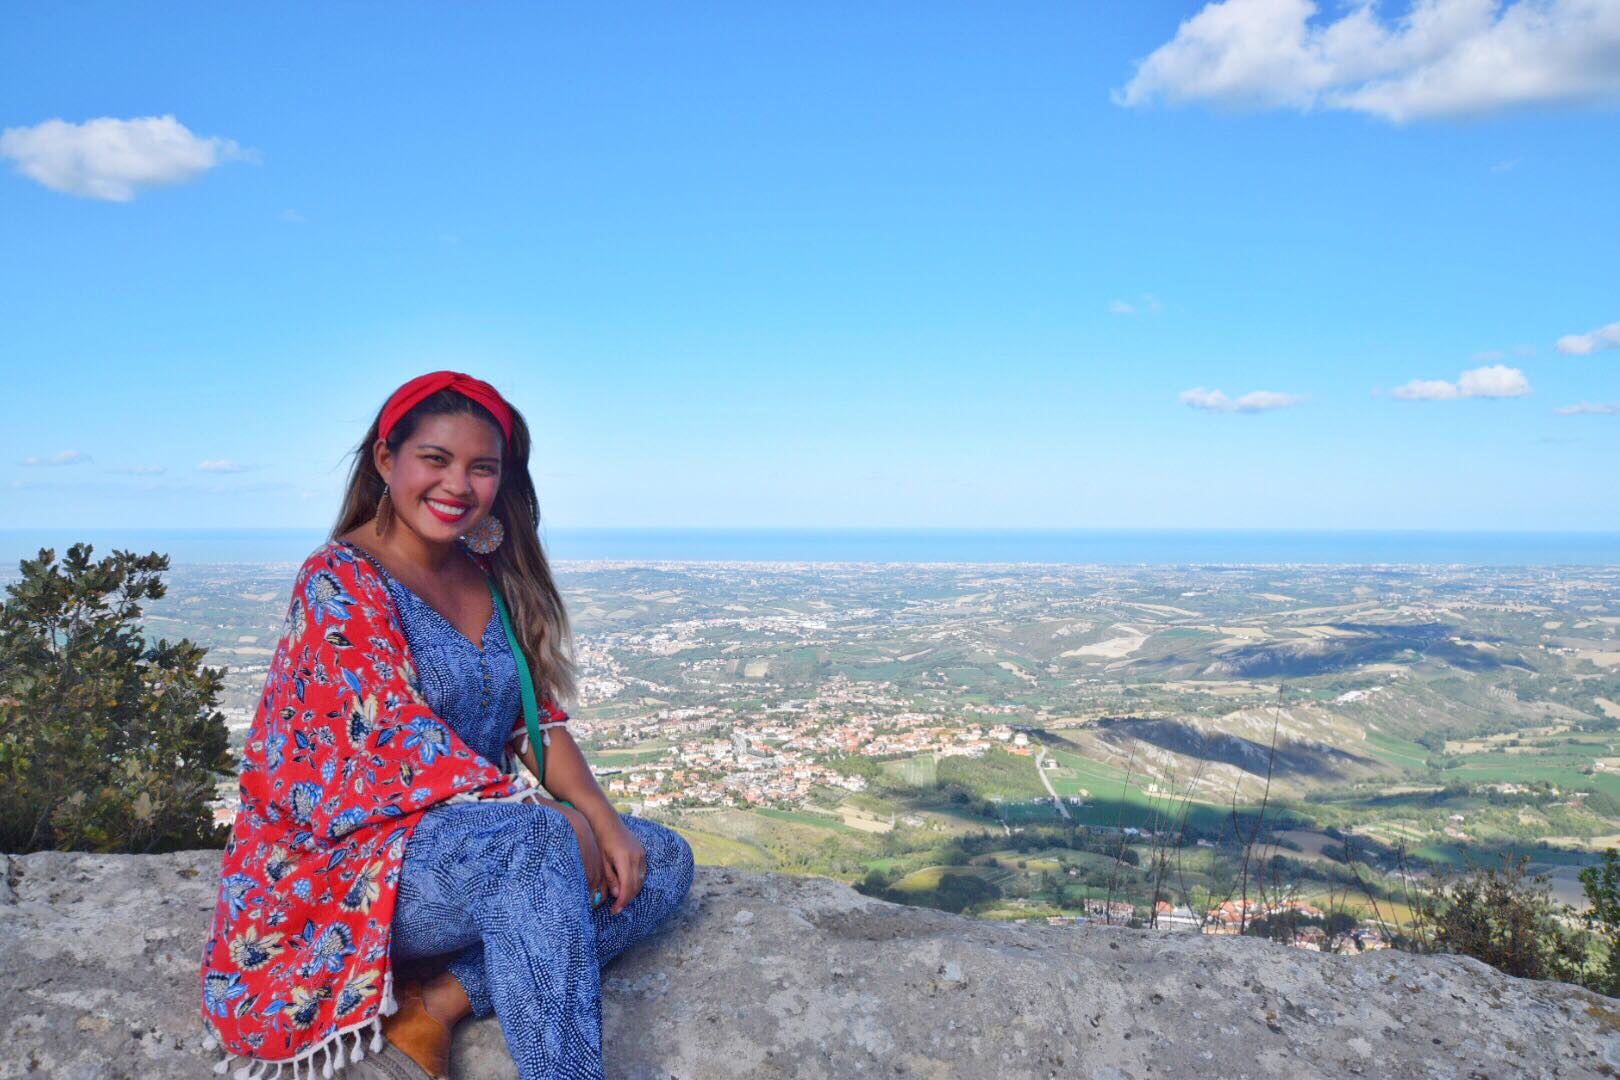 A native woman from San Marino smiling on camera